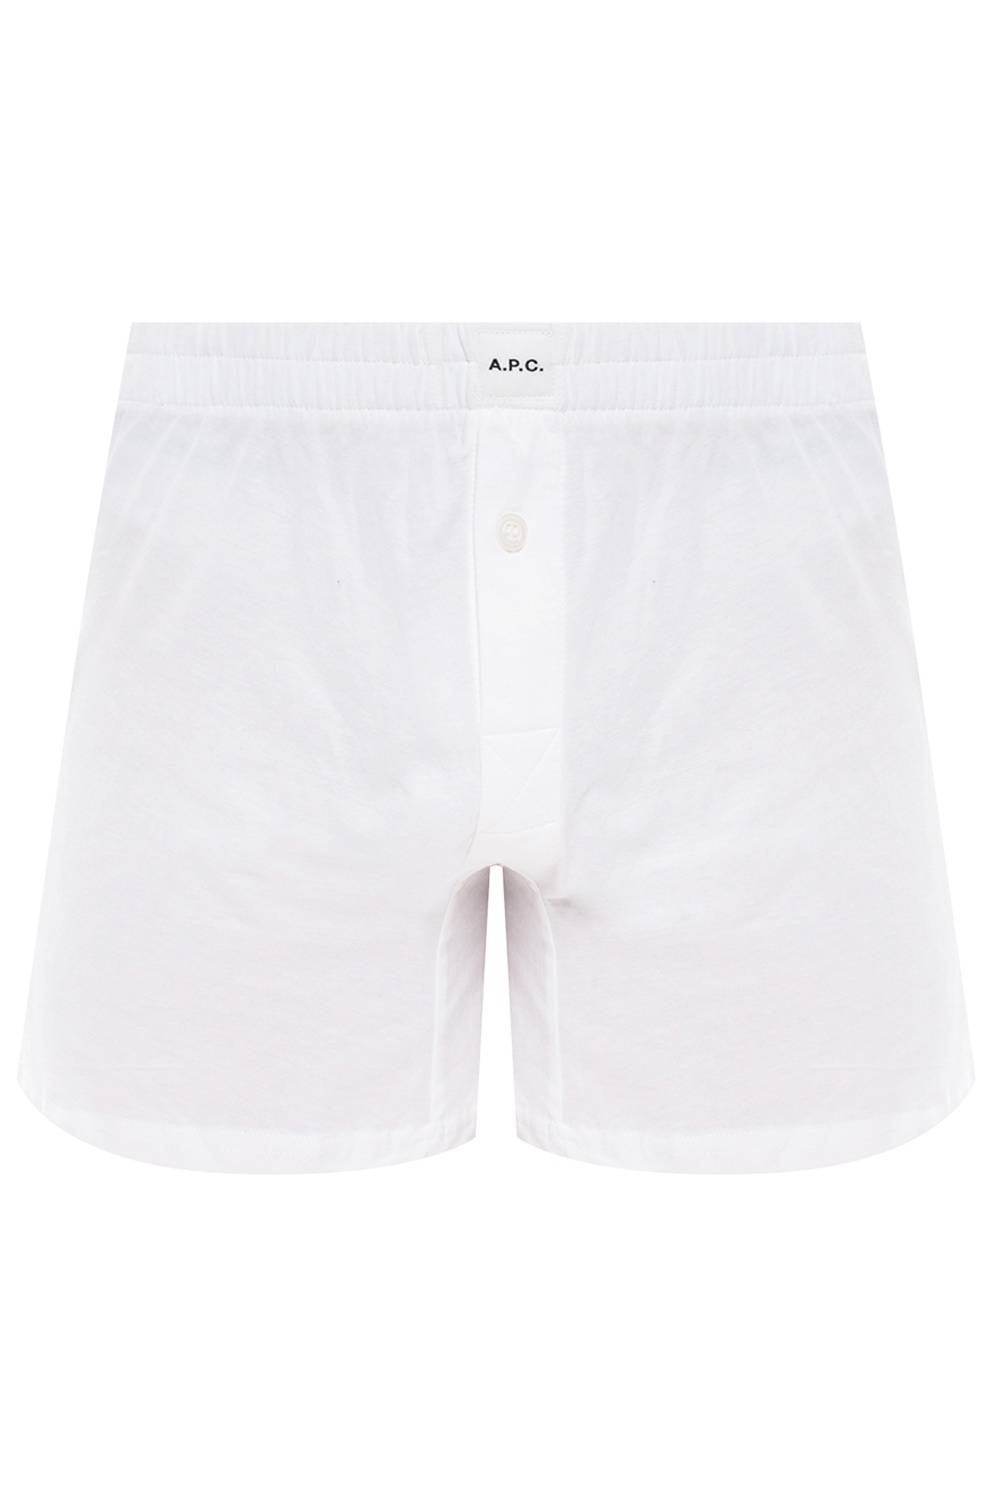 A.P.C. Boxers with logo